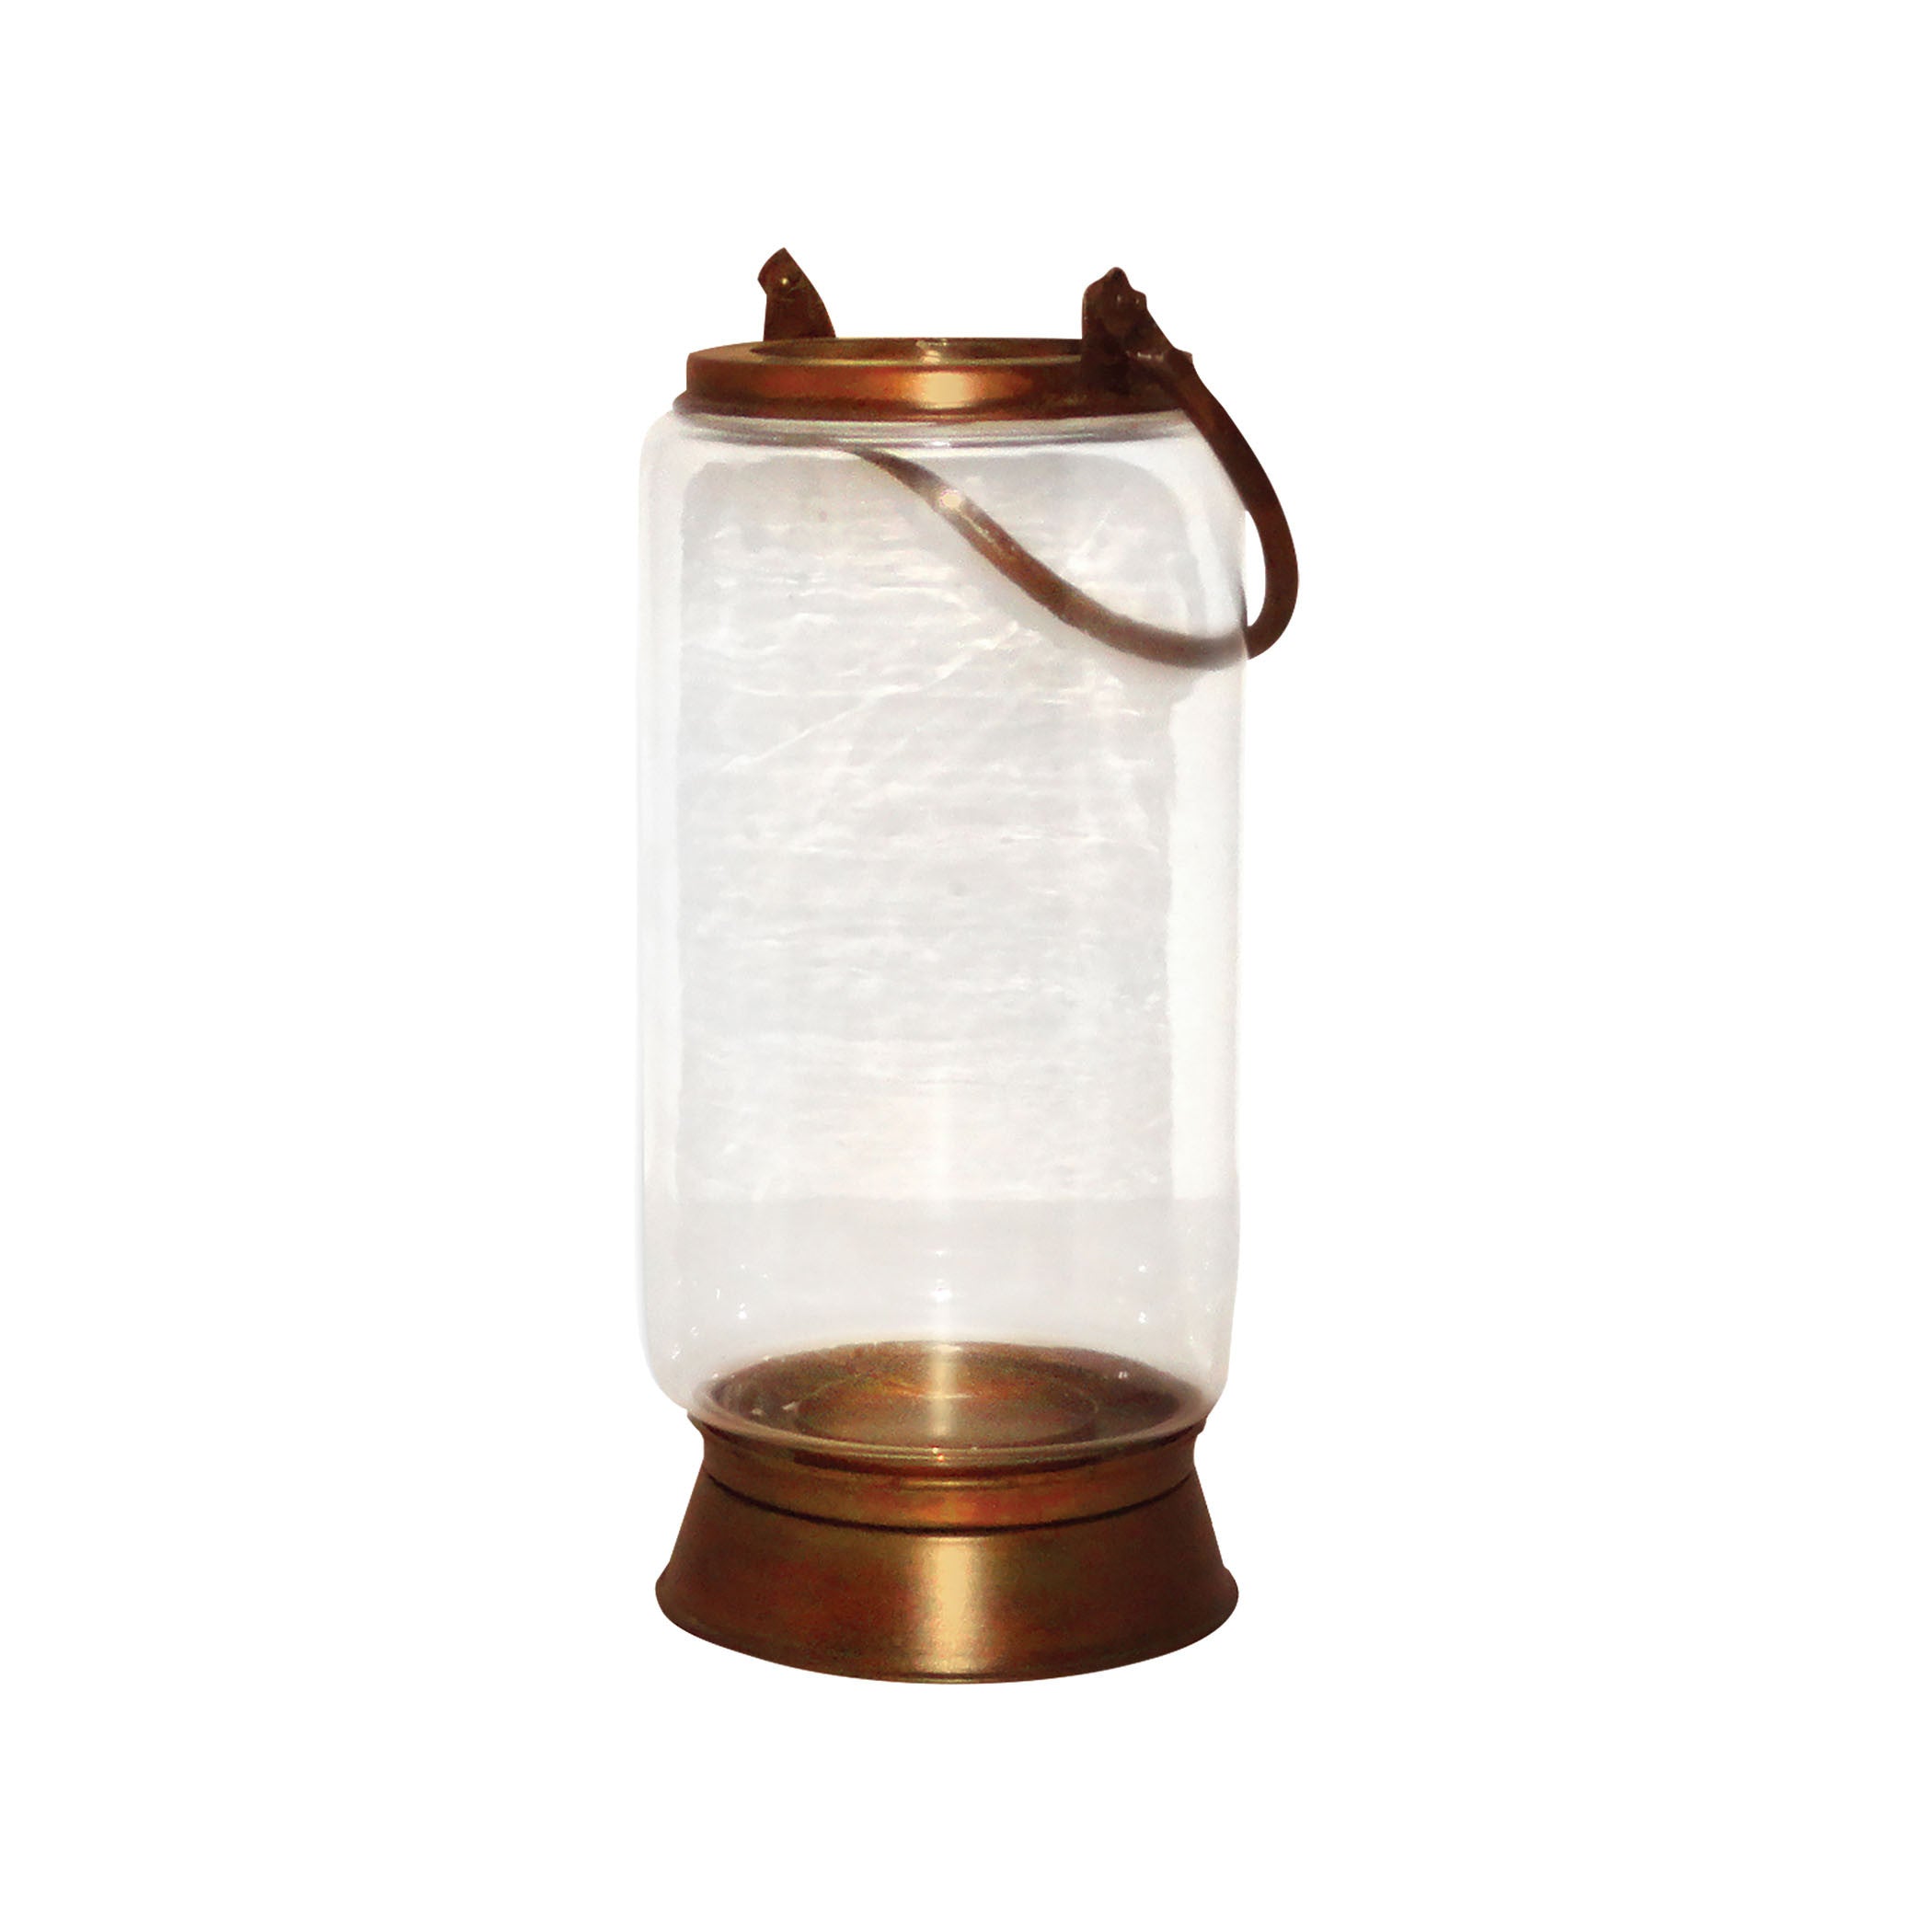 Pomeroy Pom-401336 Taos Collection Burned Copper,clear Finish Lantern